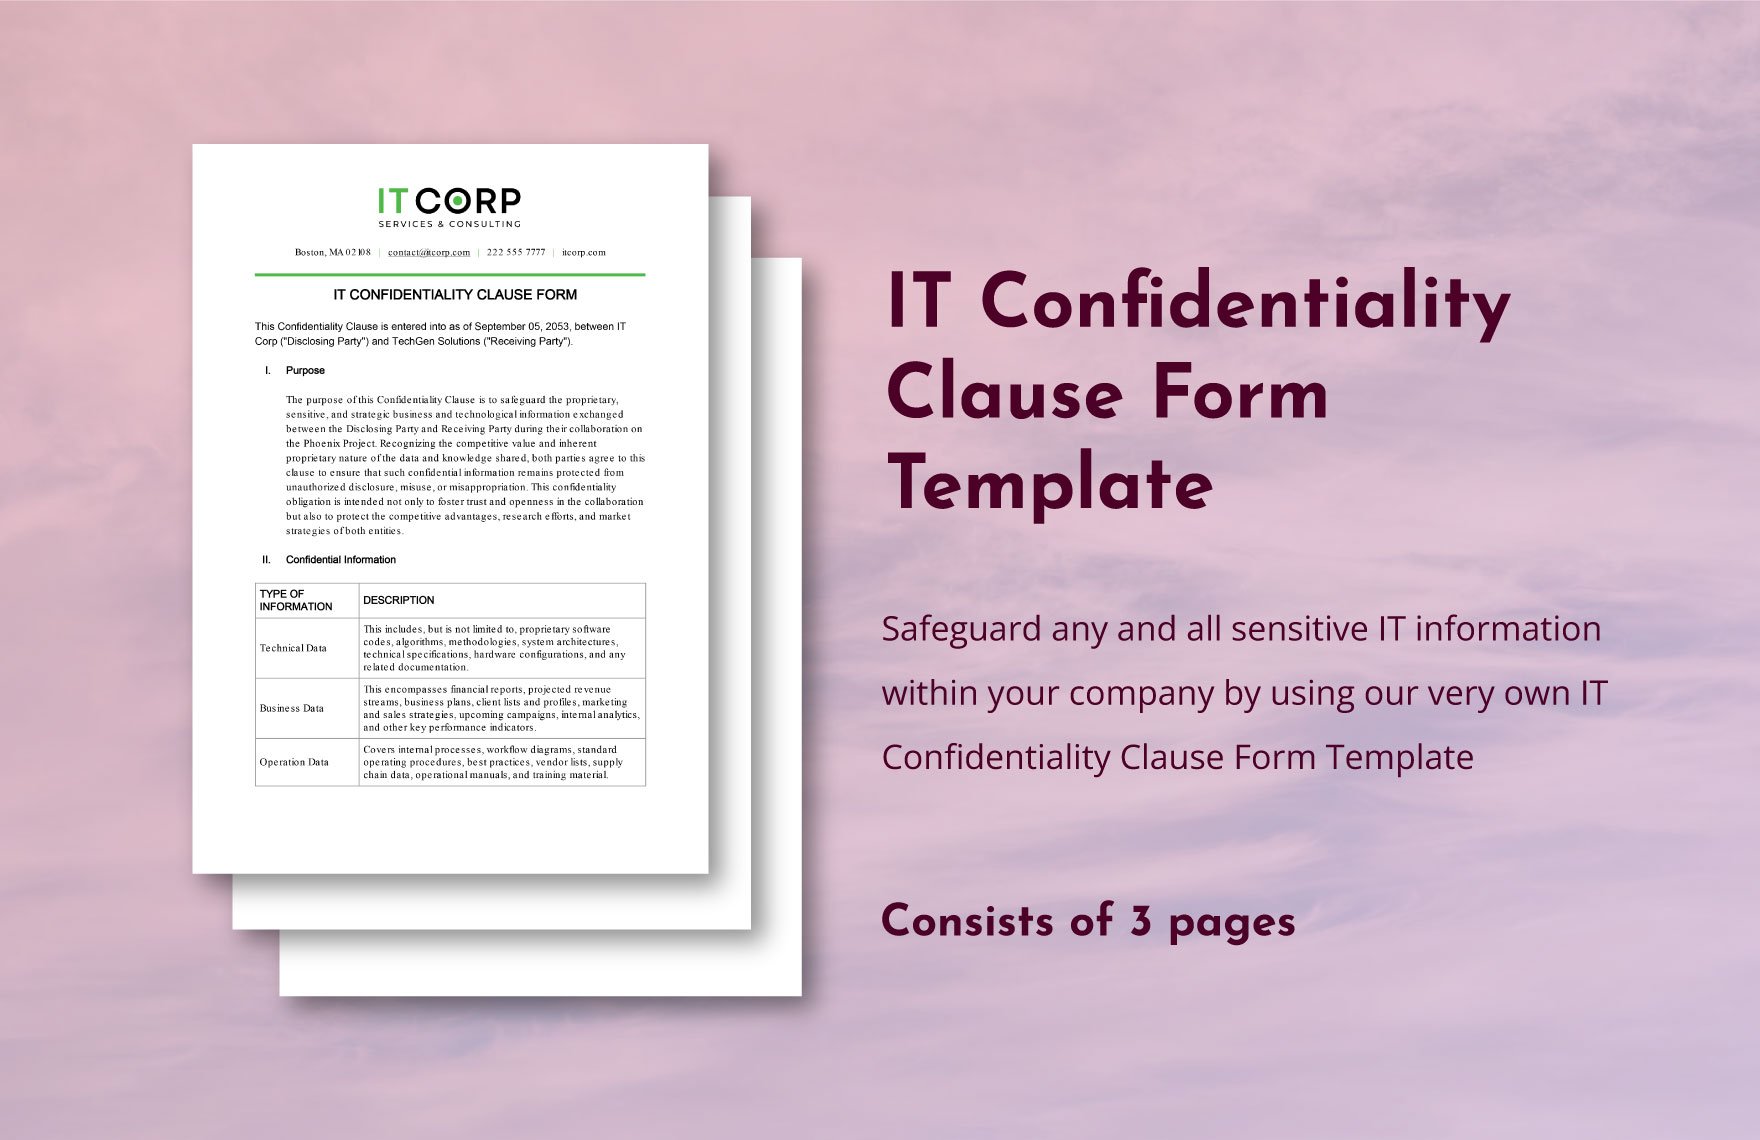 IT Confidentiality Clause Form Template in Word, Google Docs, PDF